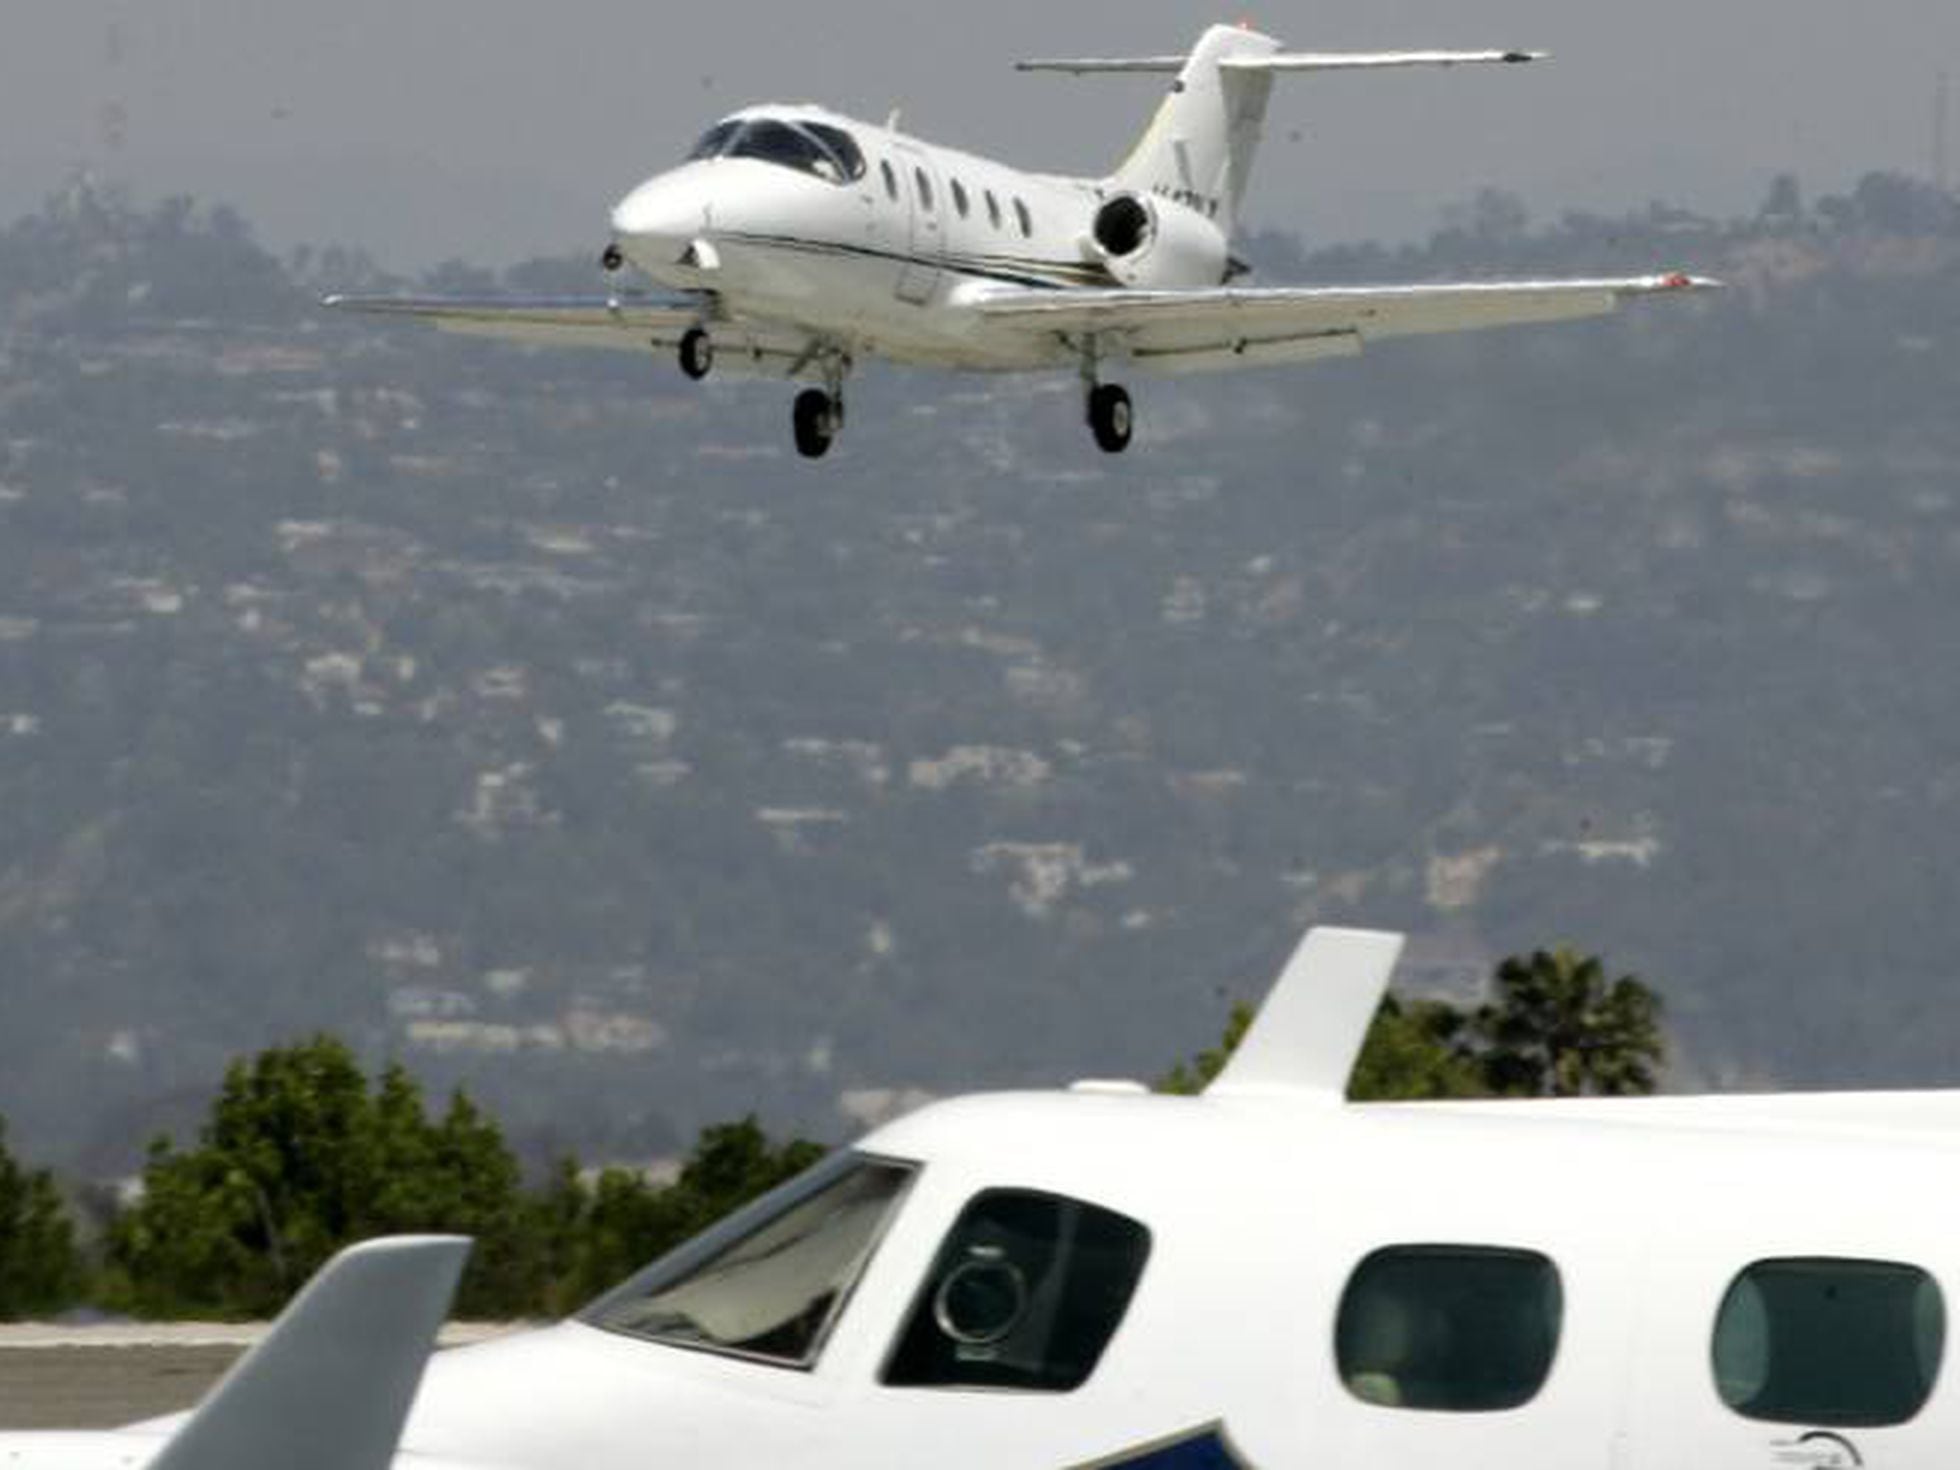 Climate change: What should we do about private jets?